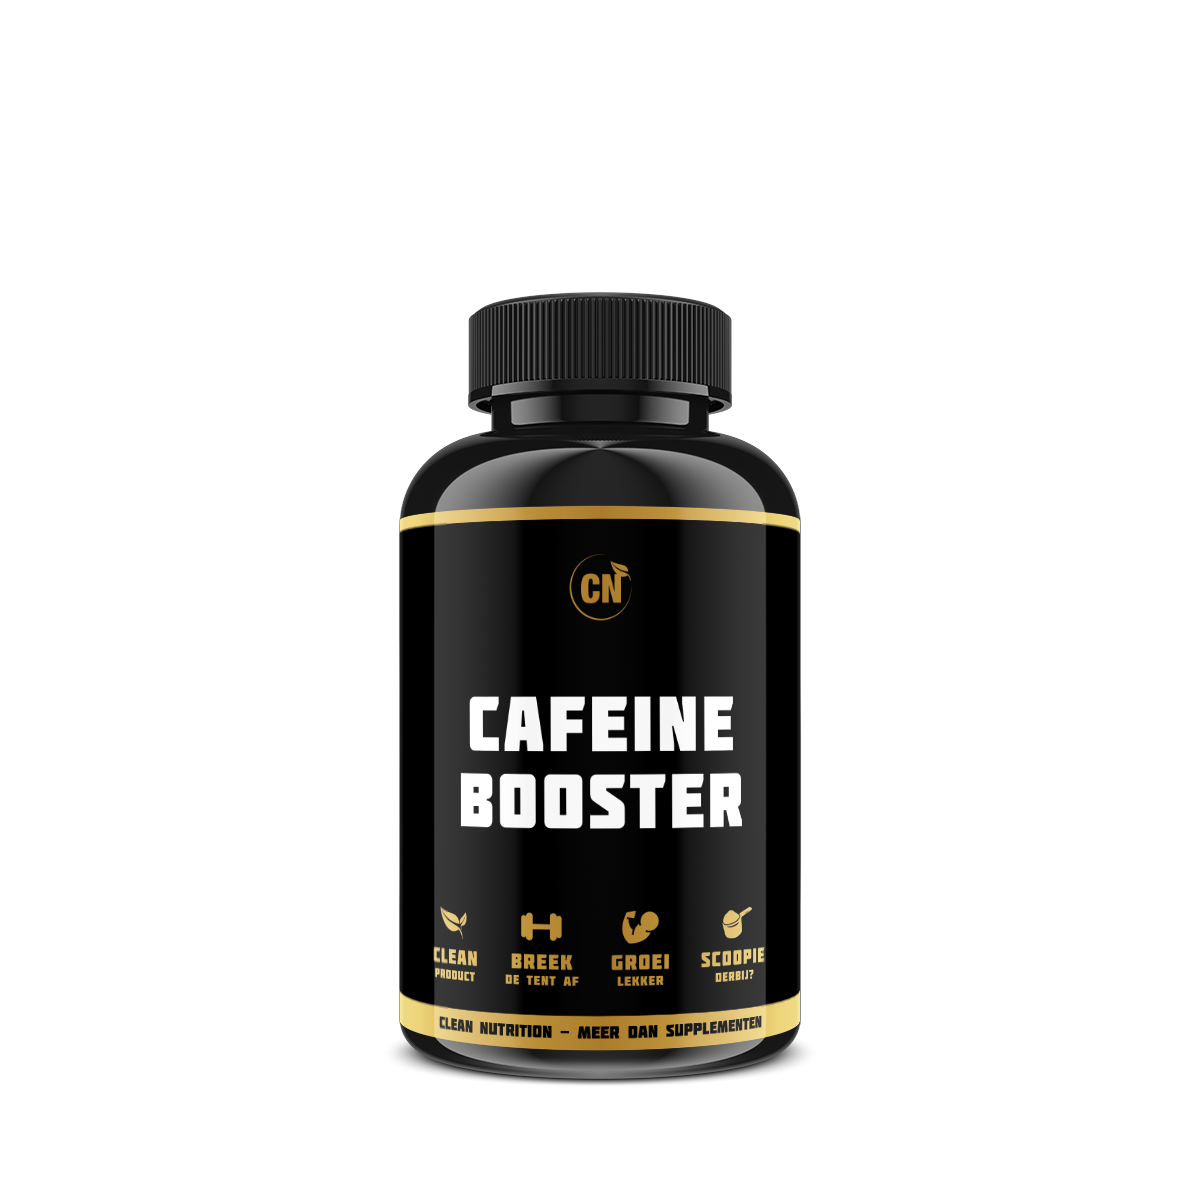 Cafeïne Booster